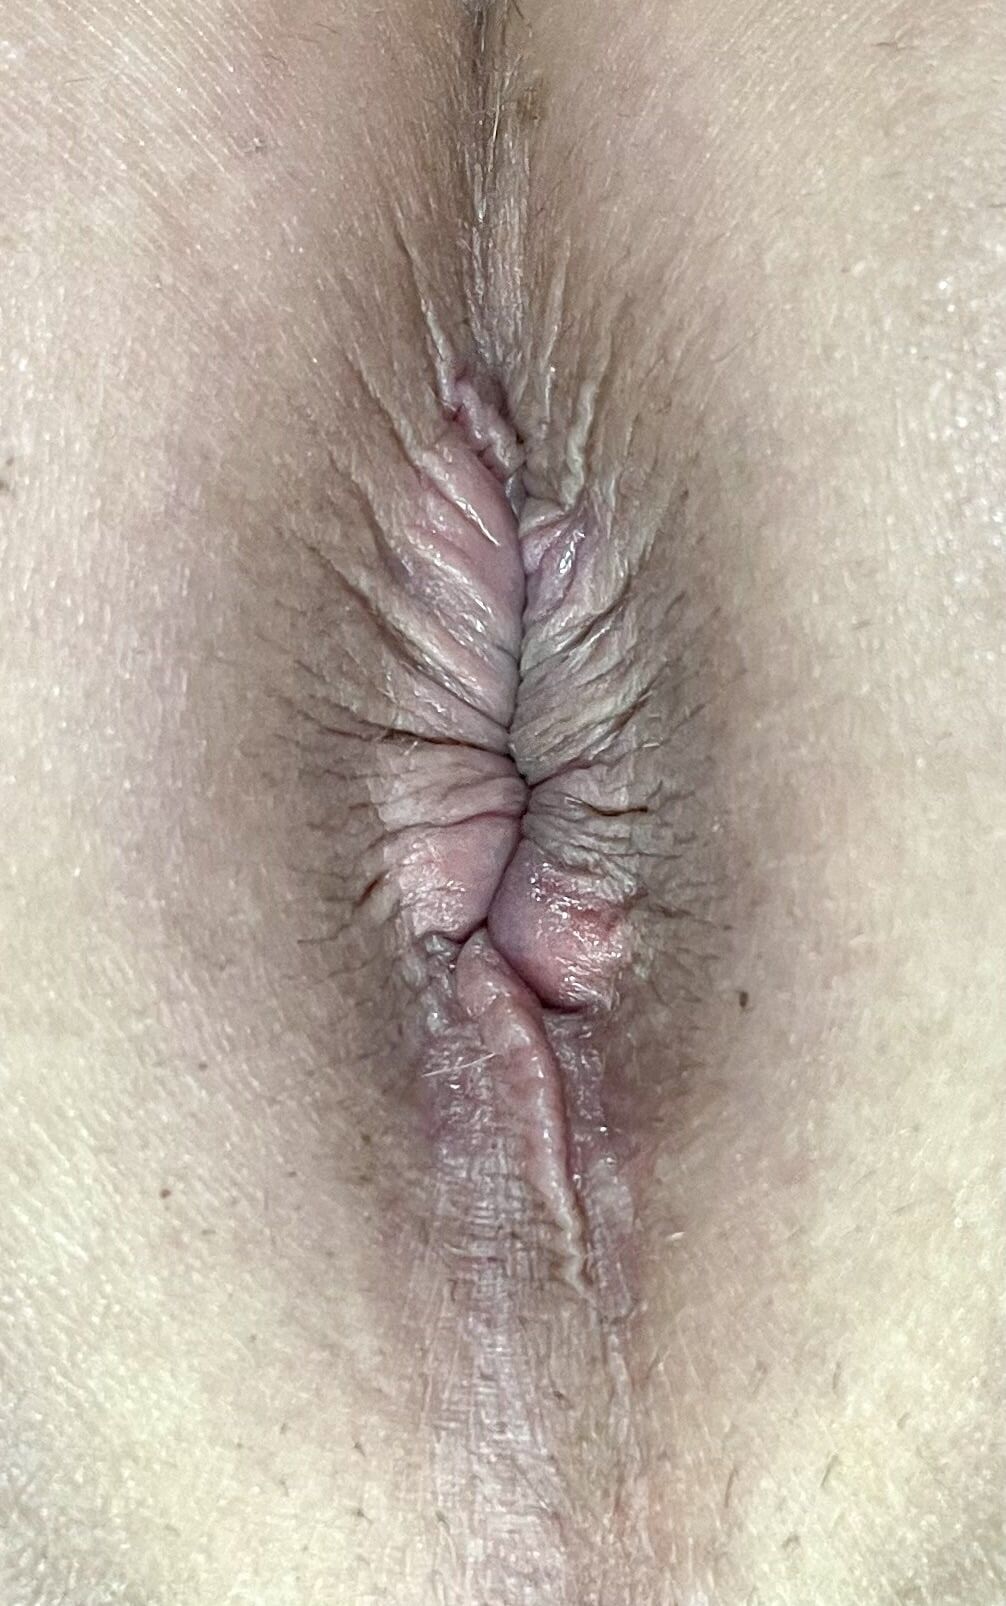 My gaping hole needs to be licked #5